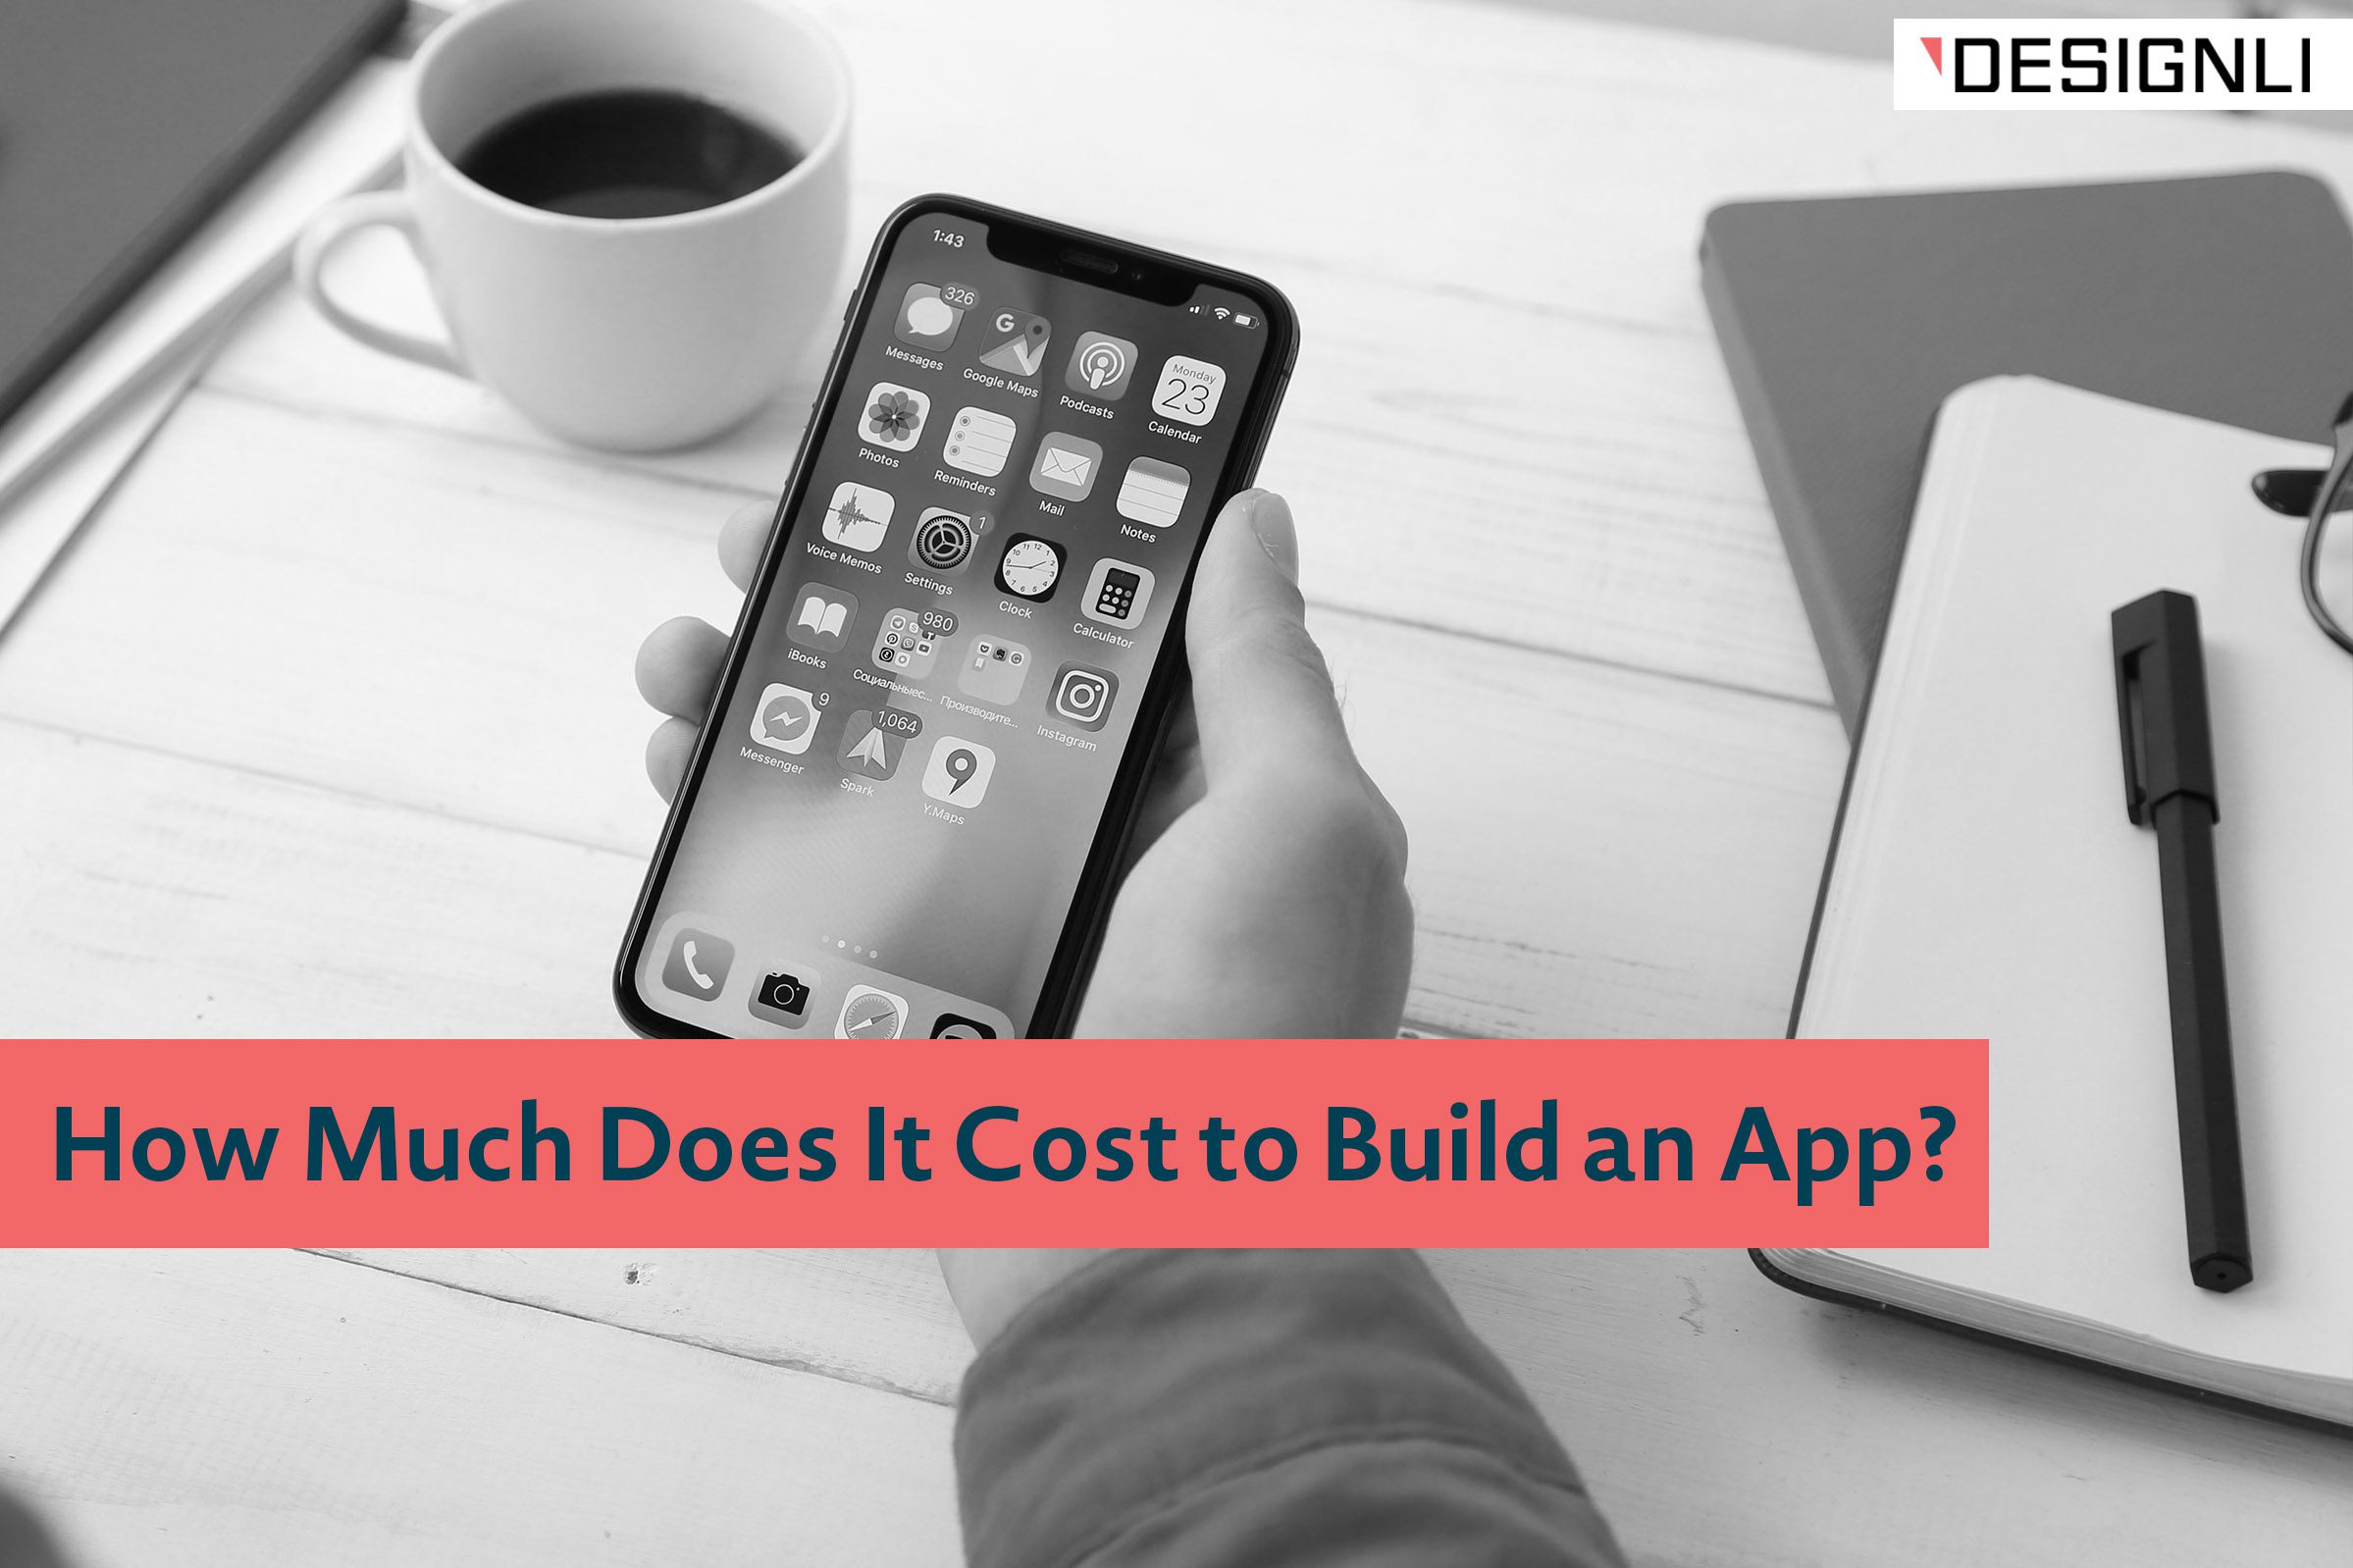 How Much Does It Cost to Build an App?